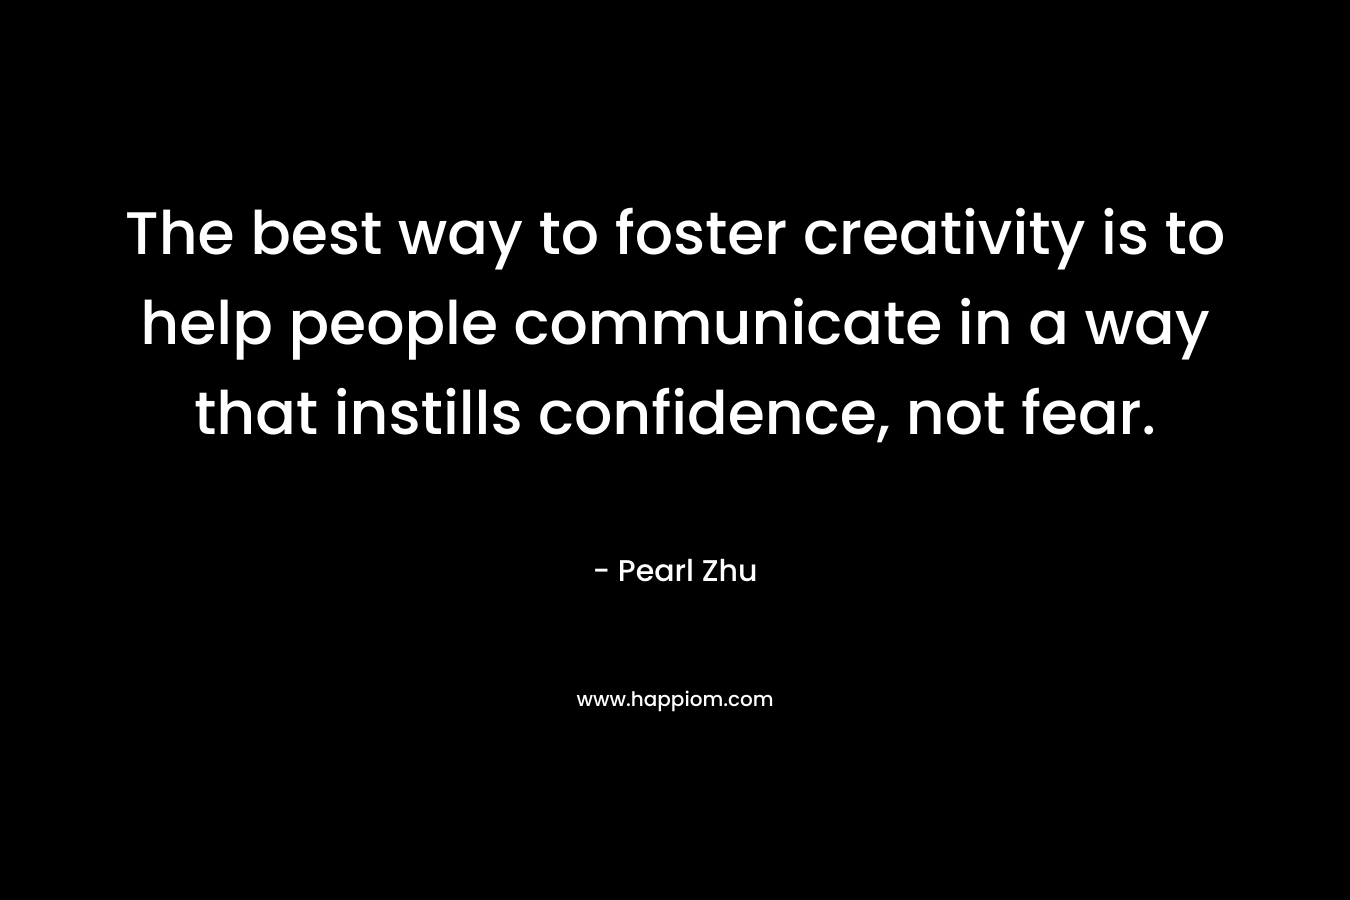 The best way to foster creativity is to help people communicate in a way that instills confidence, not fear.